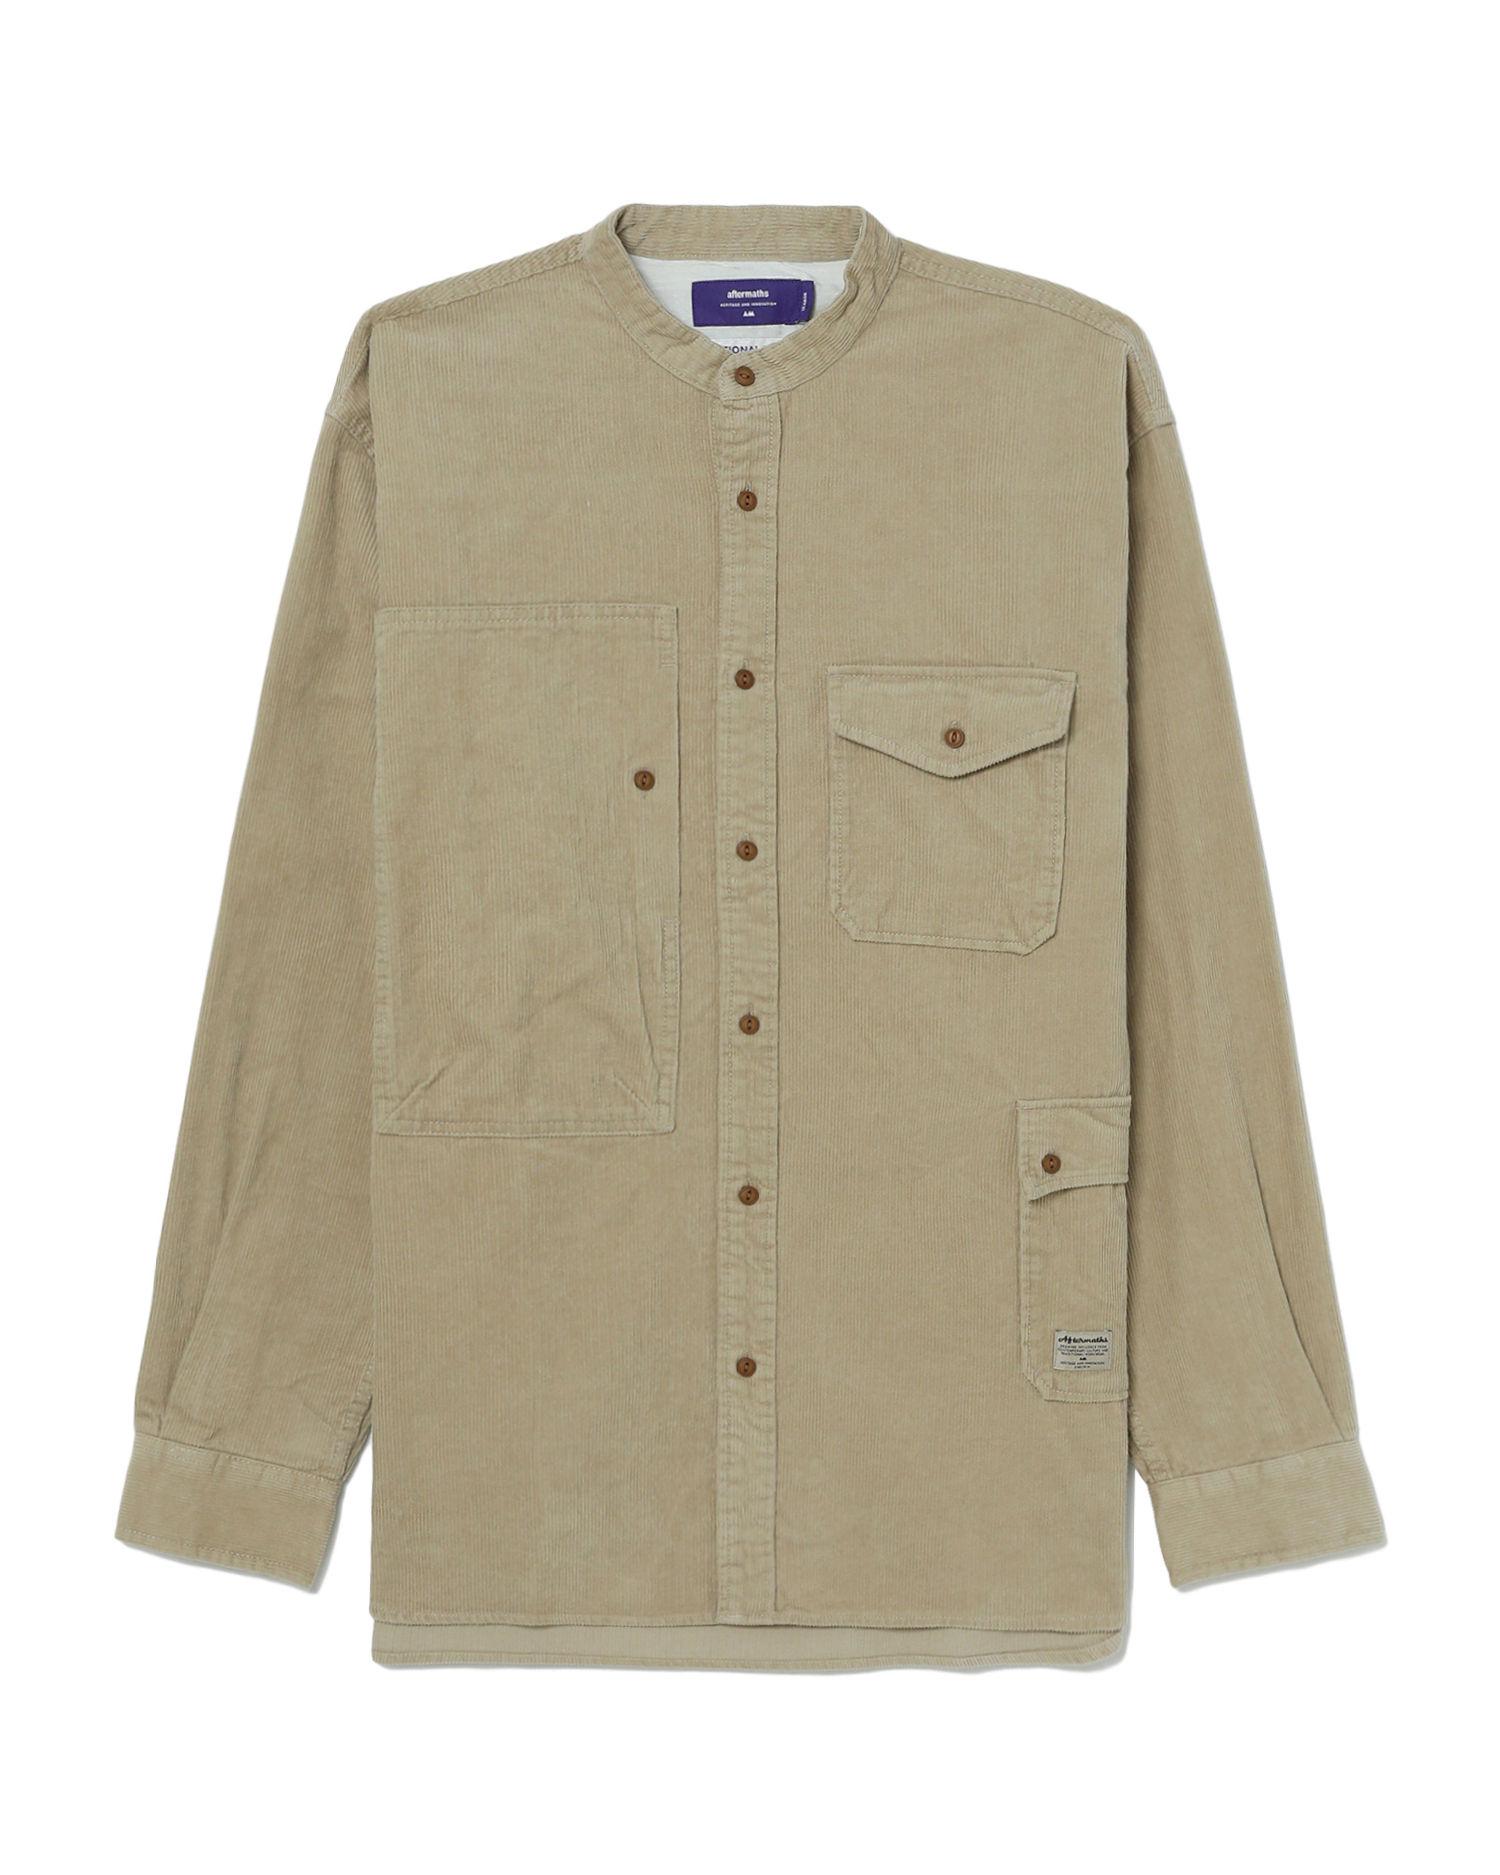 Corduroy long sleeve shirt by AFTERMATHS